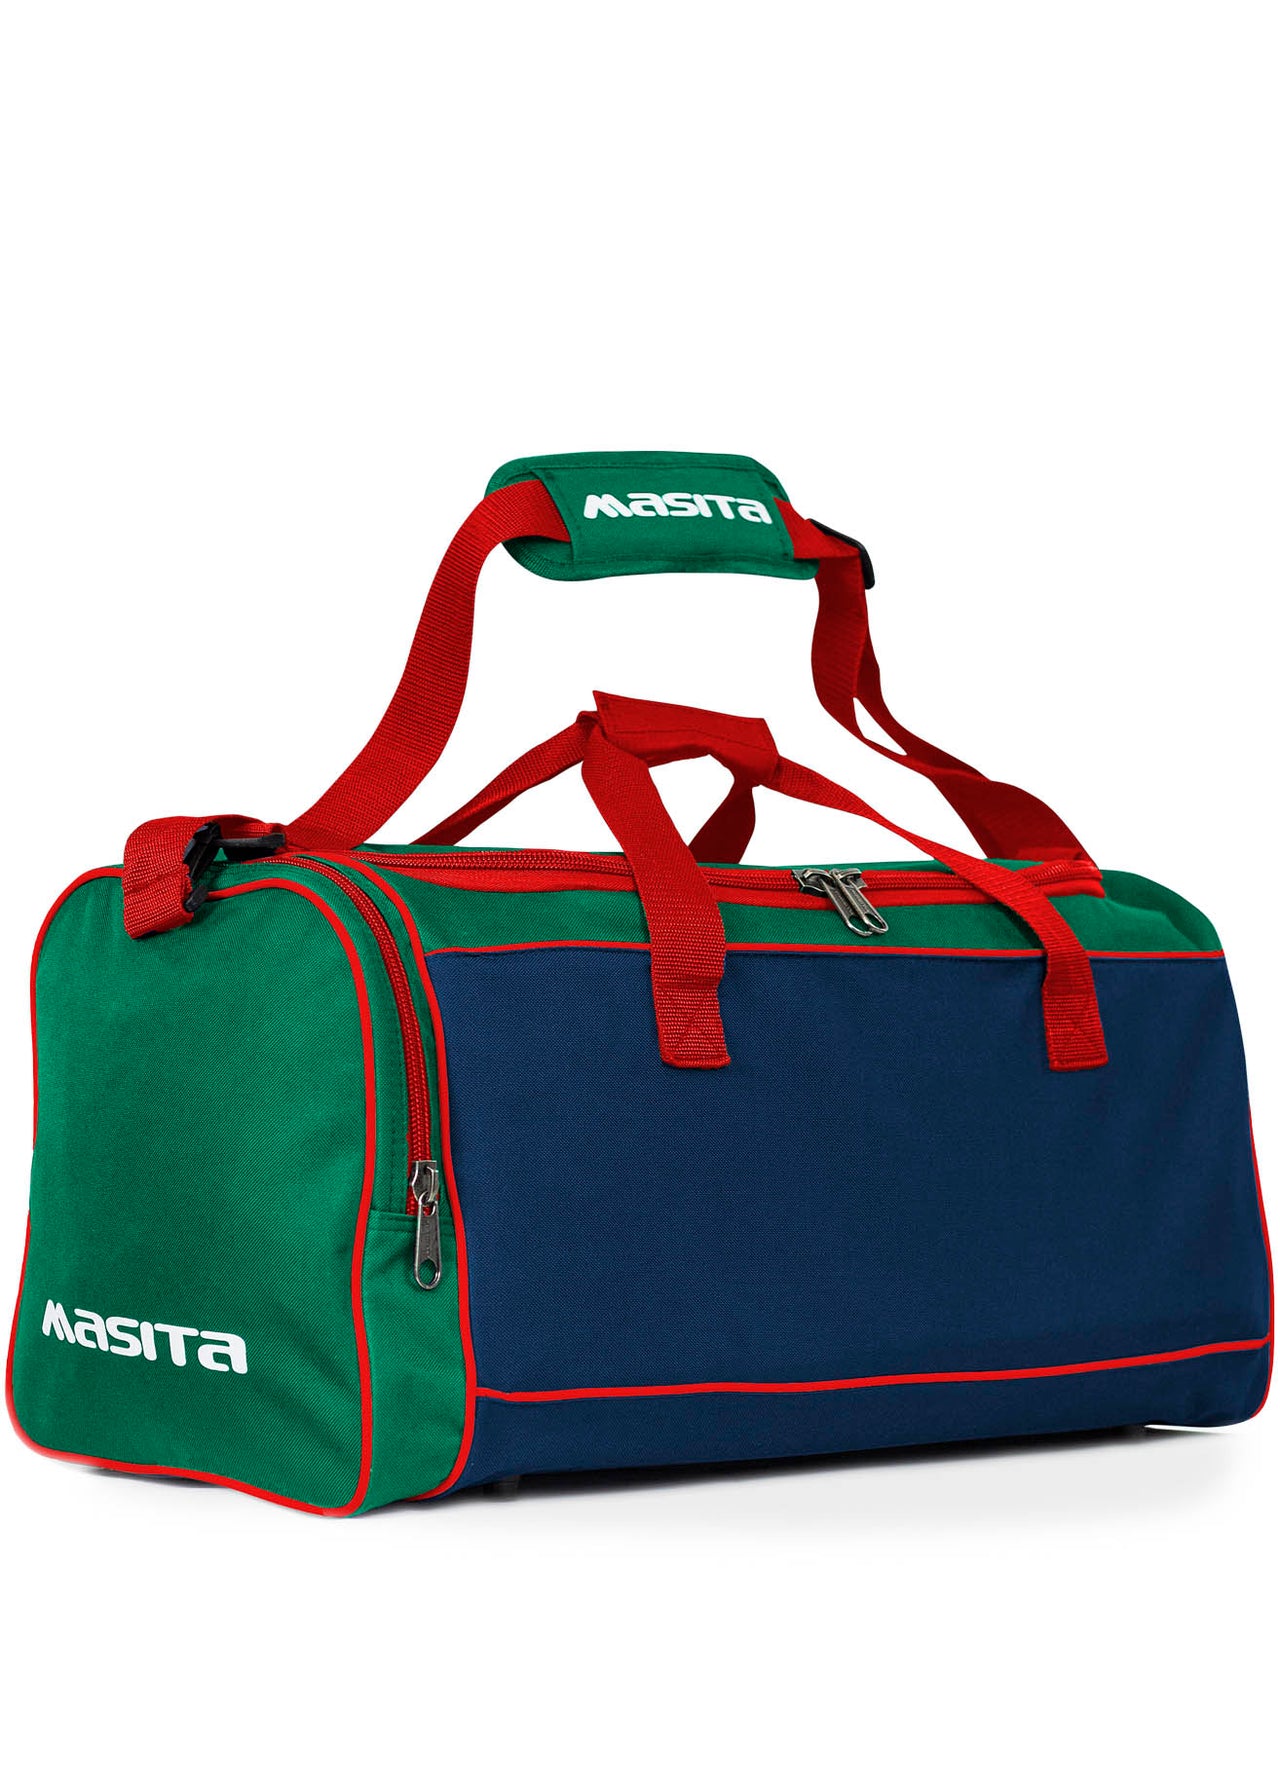 Forza Sports Bag Green/Navy/Red